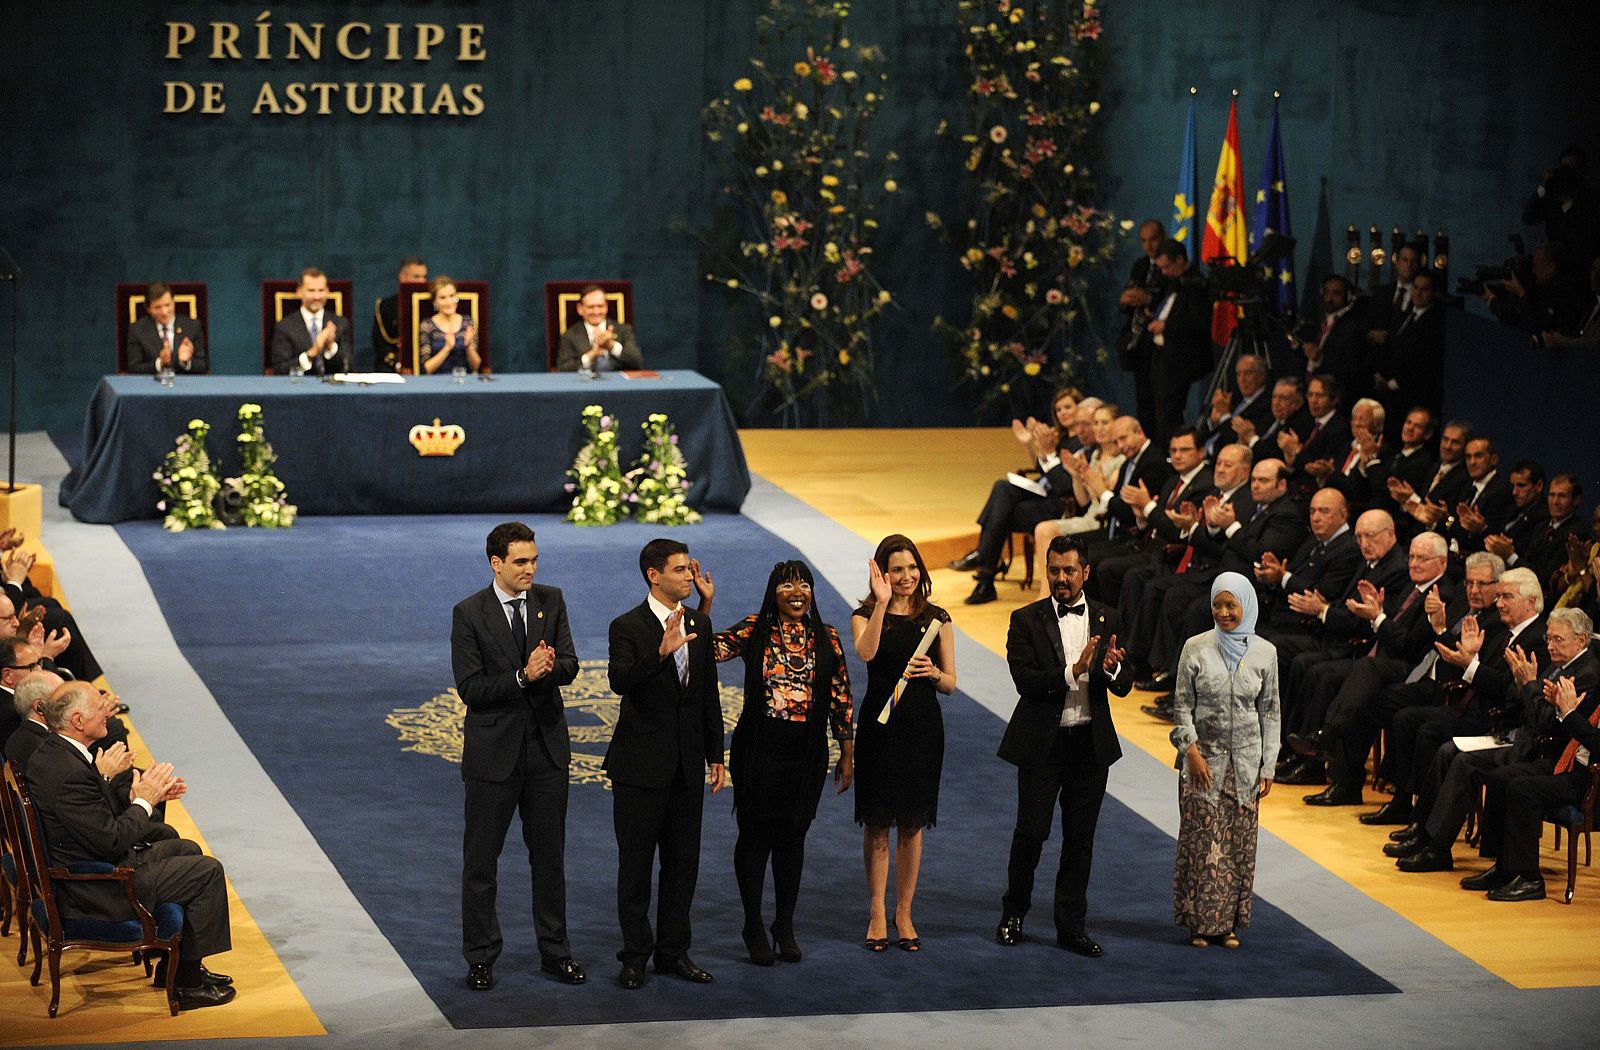 Members of the Fulbright Program acknowledge the applause after receiving the 2014 Prince of Asturias award for International Cooperation in Oviedo